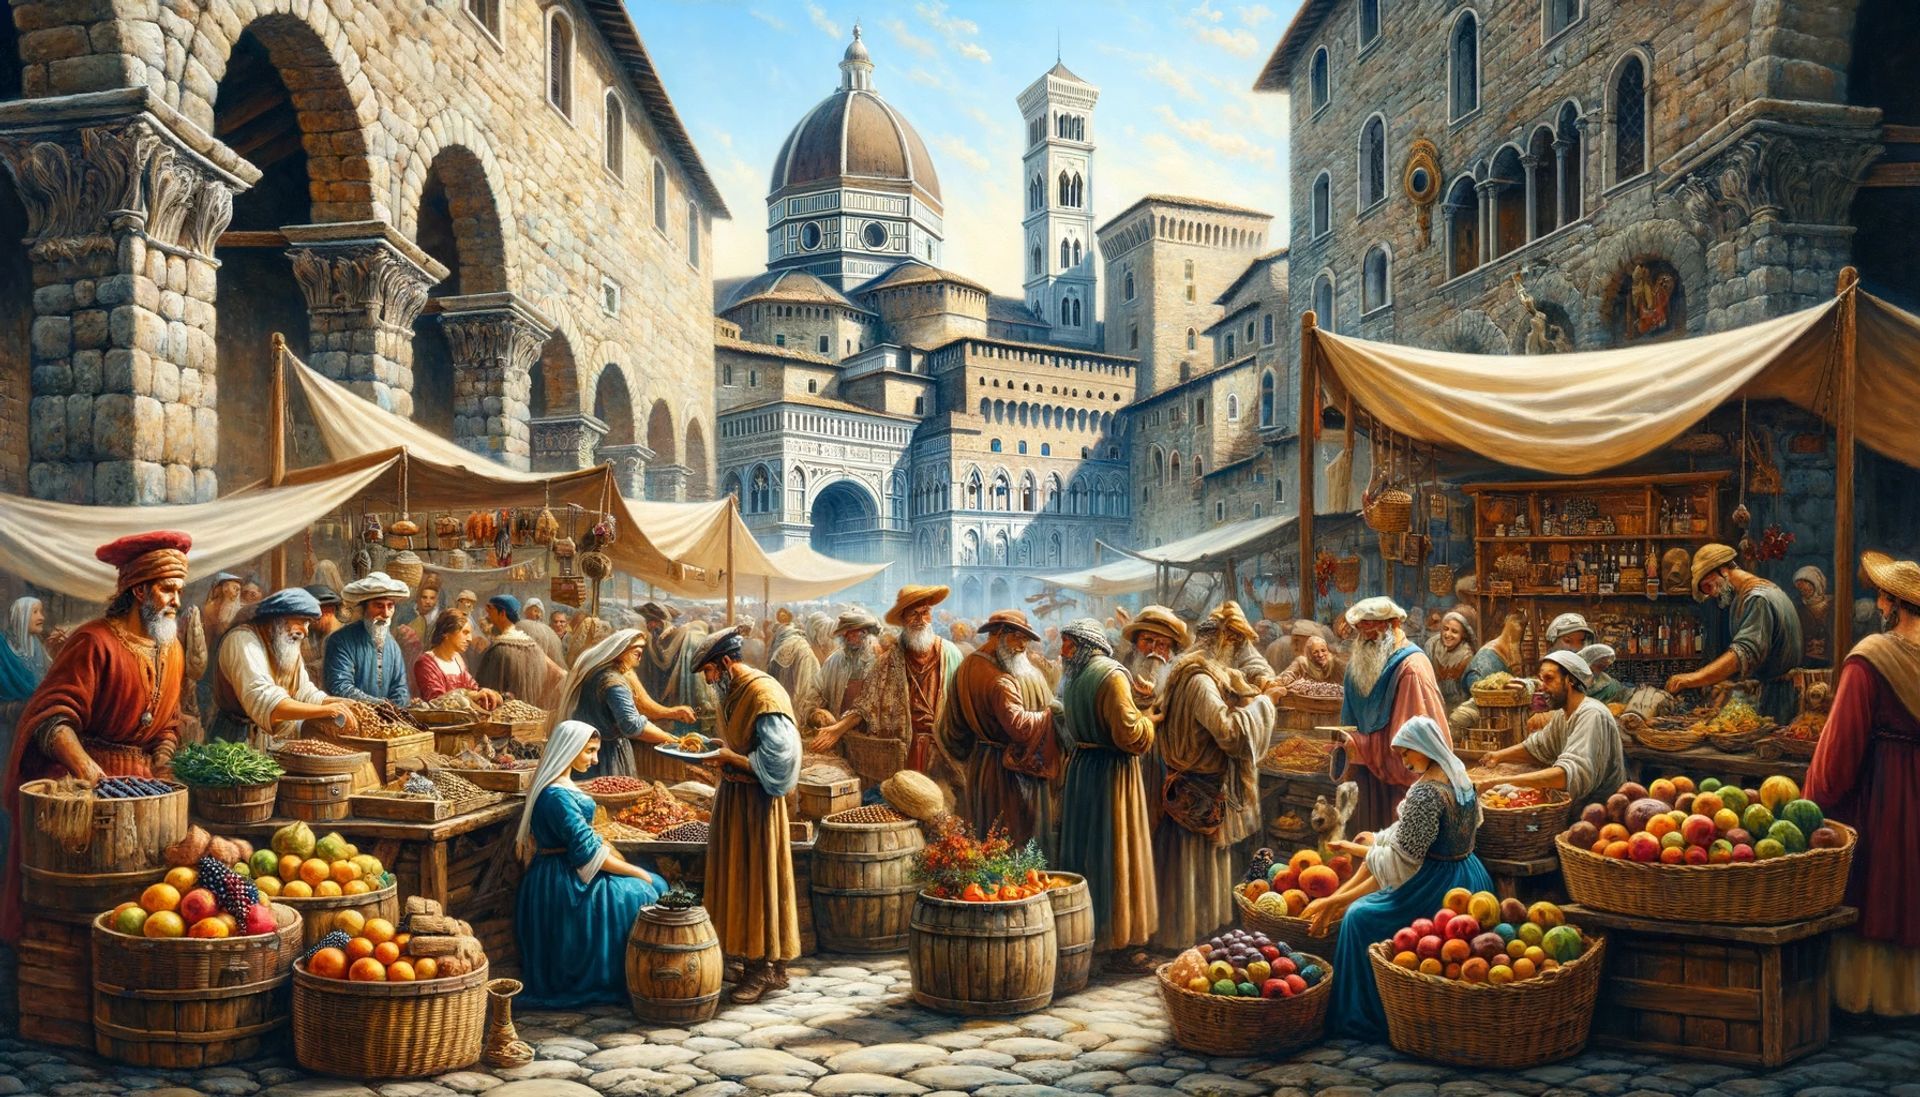 A vibrant Genoese medieval marketplace, where merchants sold spices from the East Indies and various other products.